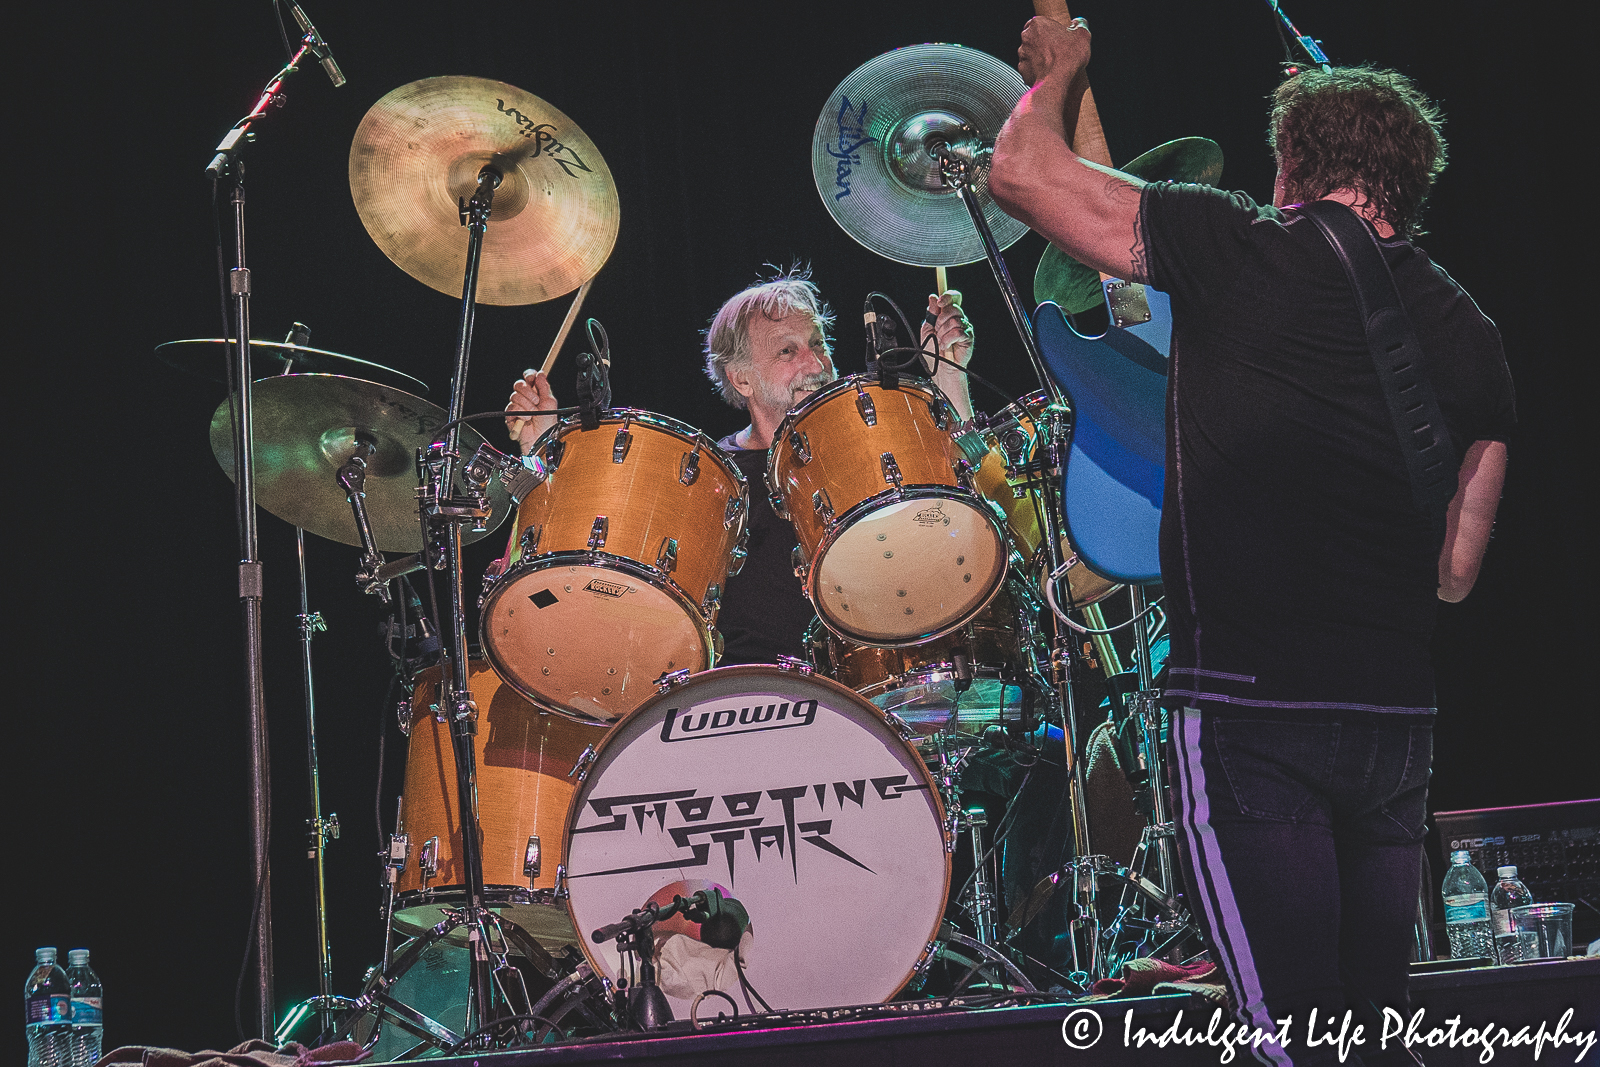 Shooting Star drummer Steve Thomas and lead singer Todd Pettygrove closing out their show with "Last Chance" at Ameristar Casino's Star Pavilion in Kansas City on April 9, 2022.